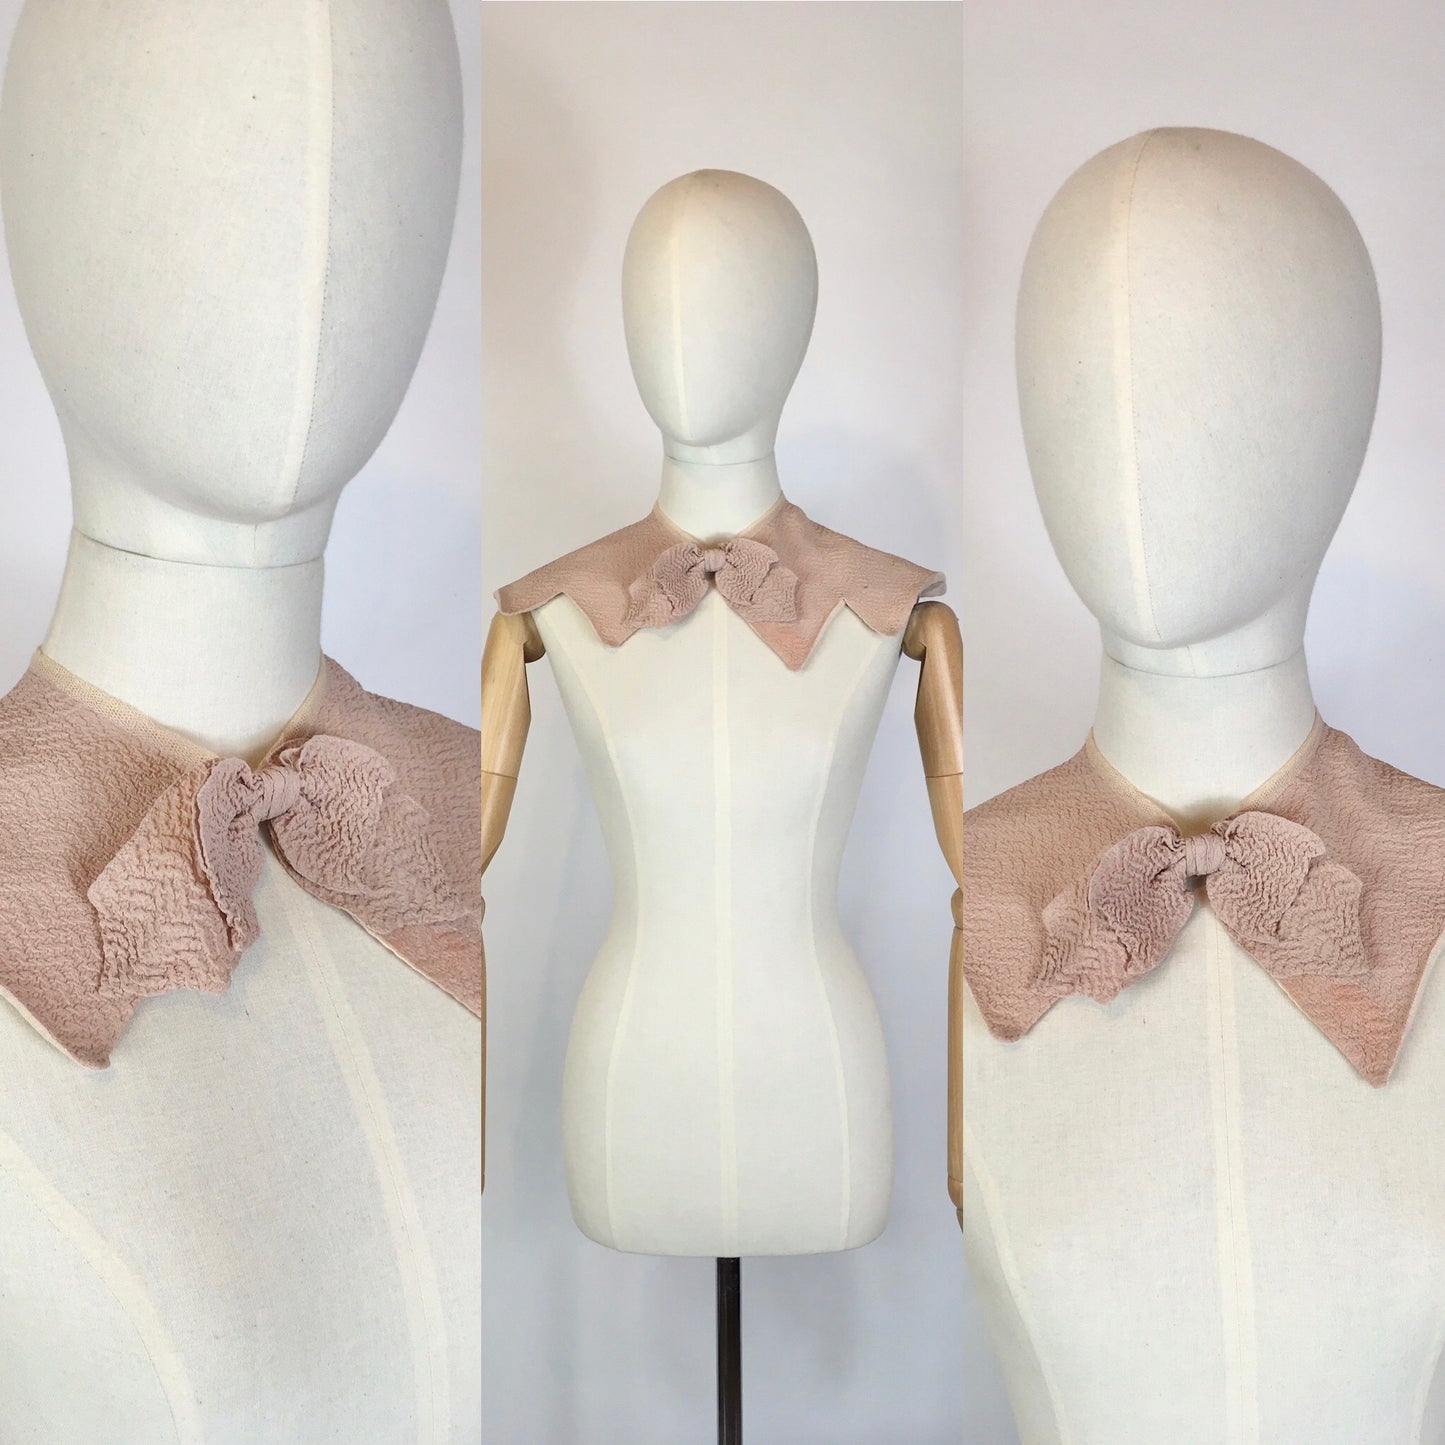 Original 1930’s / 1940’s Collar with Bow Detailing - In A Powder Pink Crepe